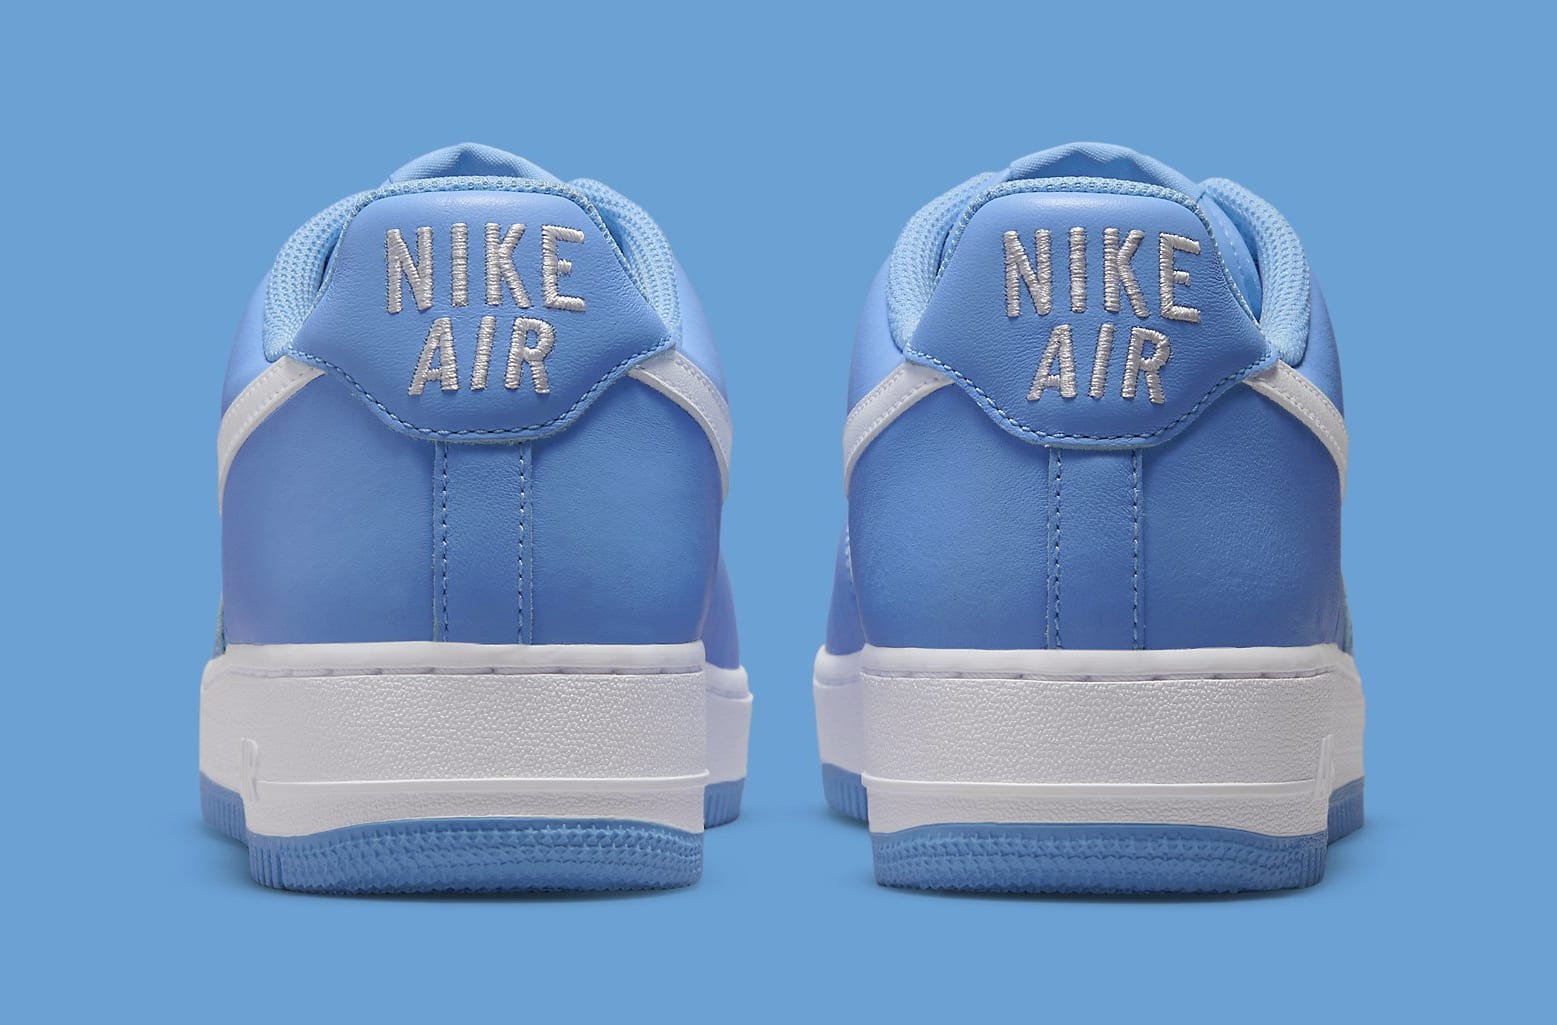 The Off-White x Nike Air Force 1 is feeling blue for its latest release,  this extremely limited “MCA” edition. This versi…